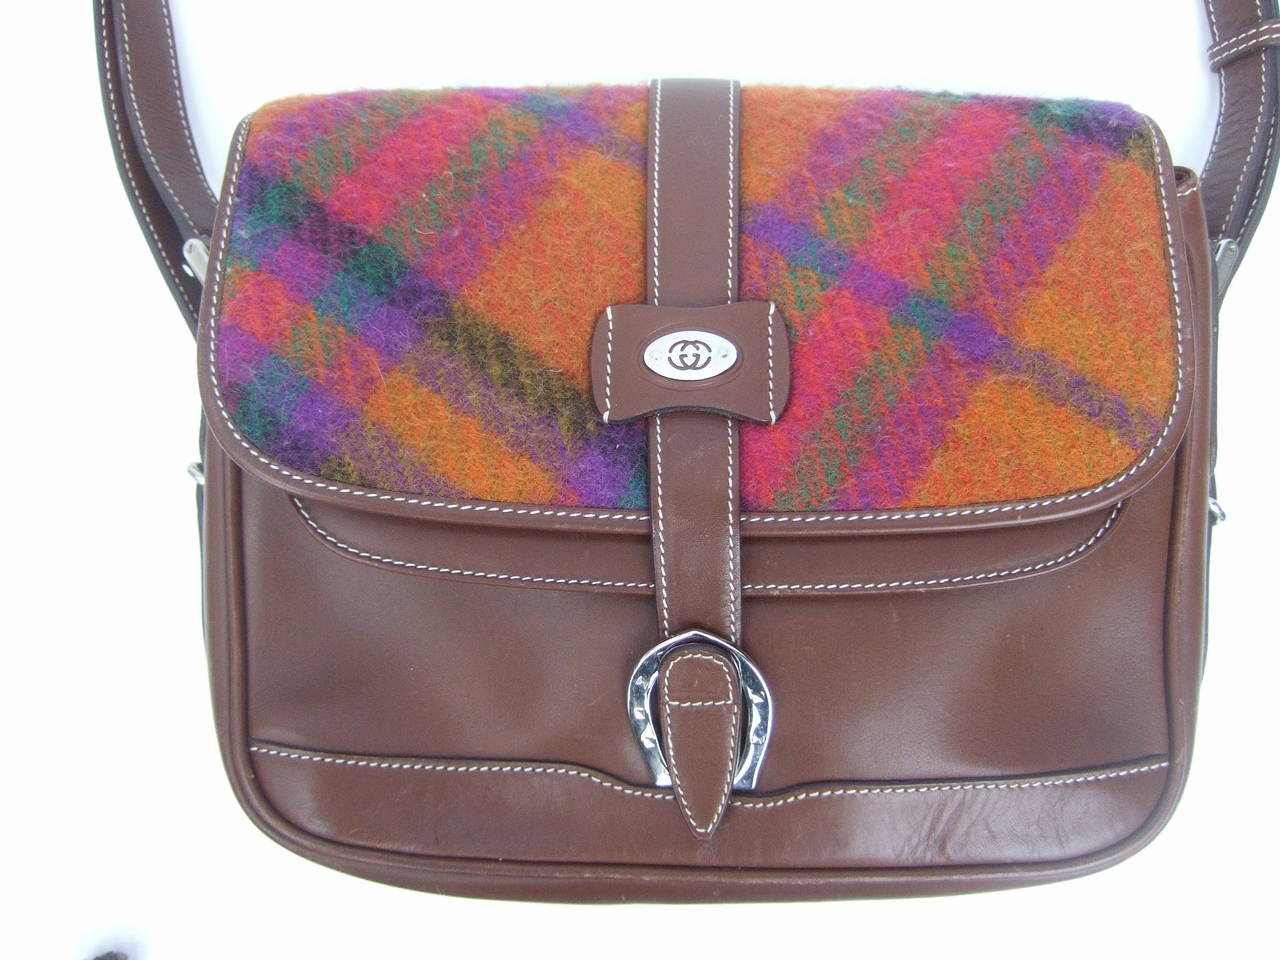 Gucci Italy Plaid Wool Brown Leather Shoulder Bag c 1980 1